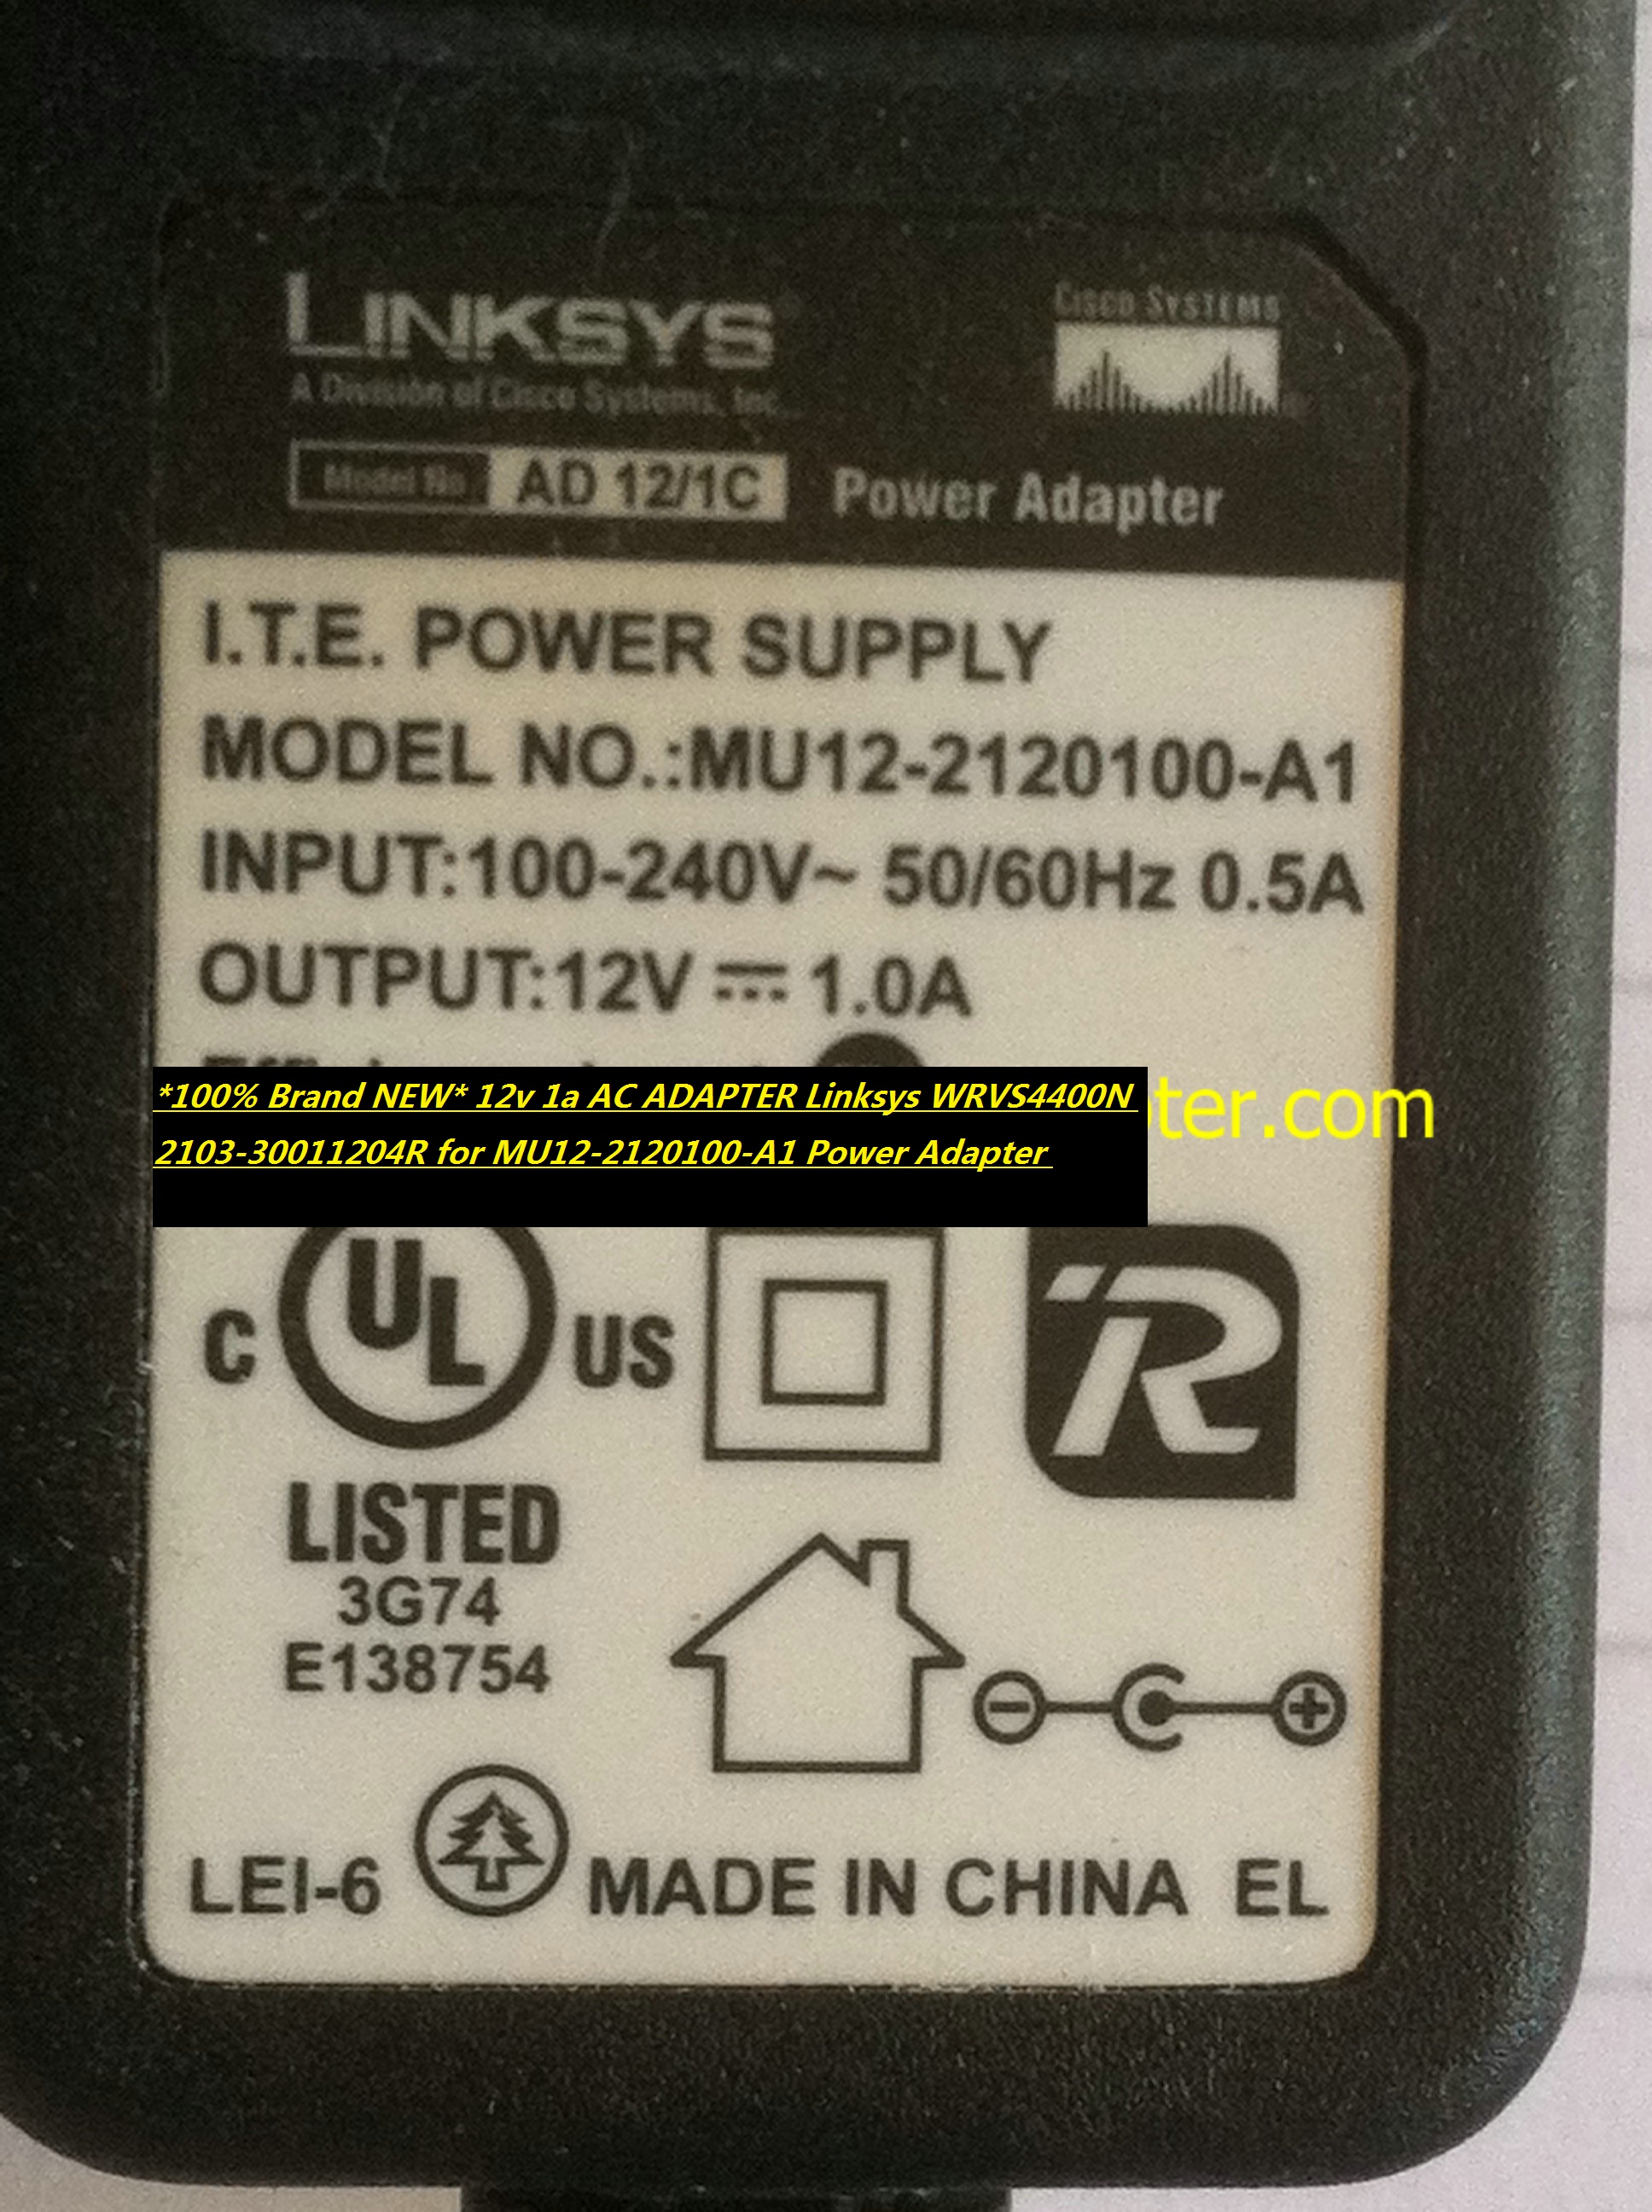 *100% Brand NEW* 12v 1a AC ADAPTER Linksys WRVS4400N 2103-30011204R for MU12-2120100-A1 Power Adapte